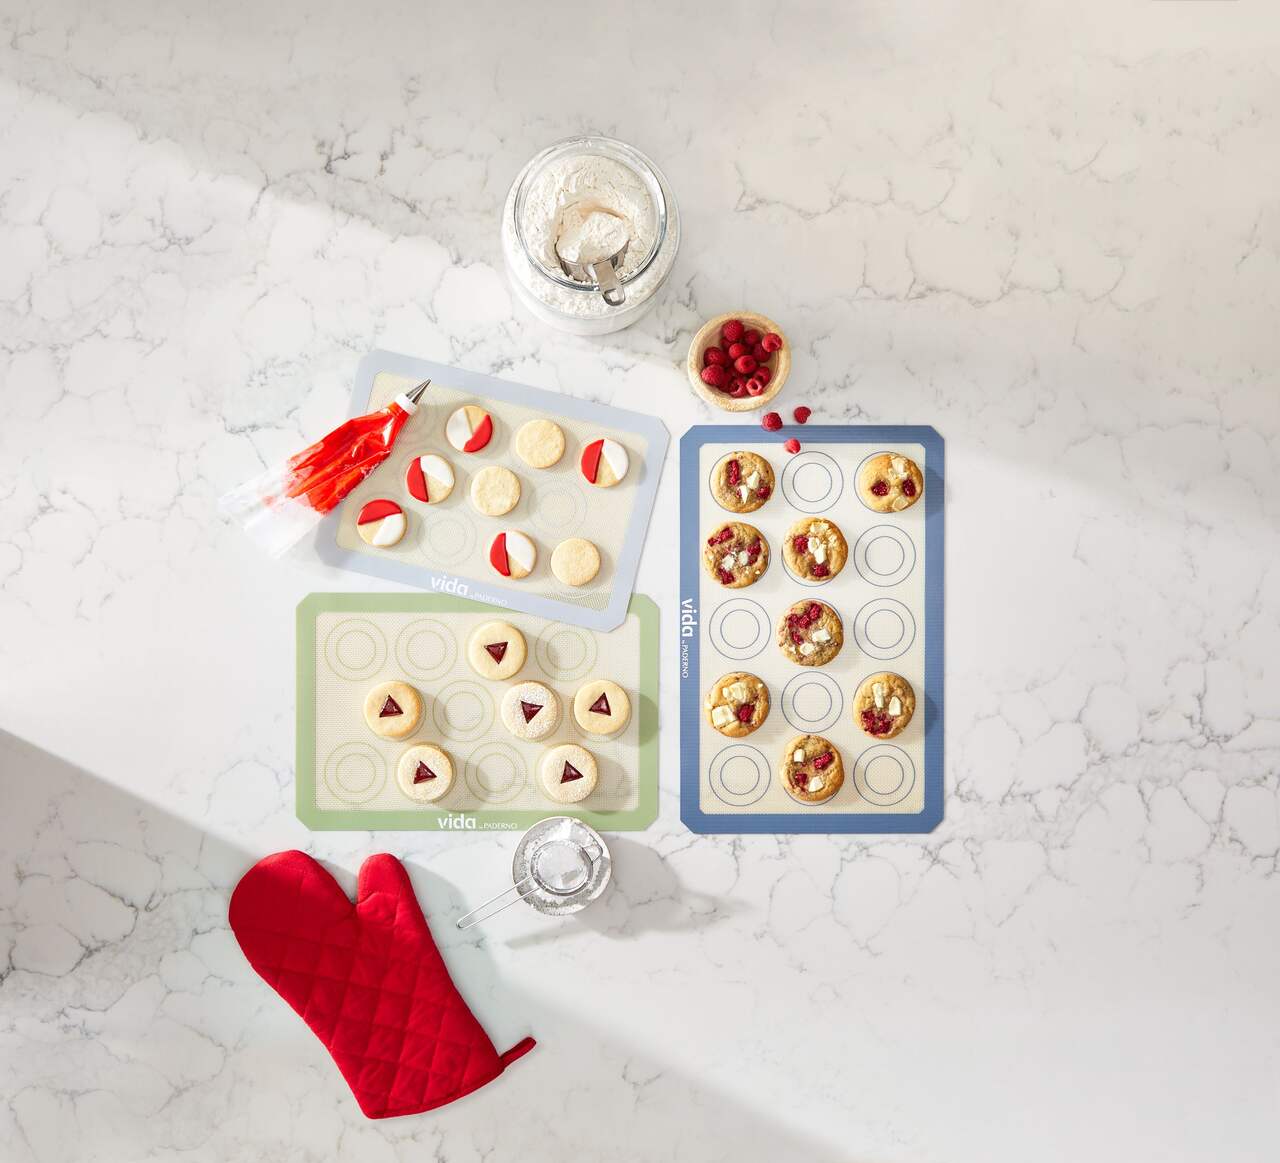 https://media-www.canadiantire.ca/product/living/kitchen/bakeware-baking-prep/1429687/vida-3pc-silicone-baking-sheets-6e2e3200-8bbe-43a3-b271-325ced3fec46-jpgrendition.jpg?imdensity=1&imwidth=1244&impolicy=mZoom